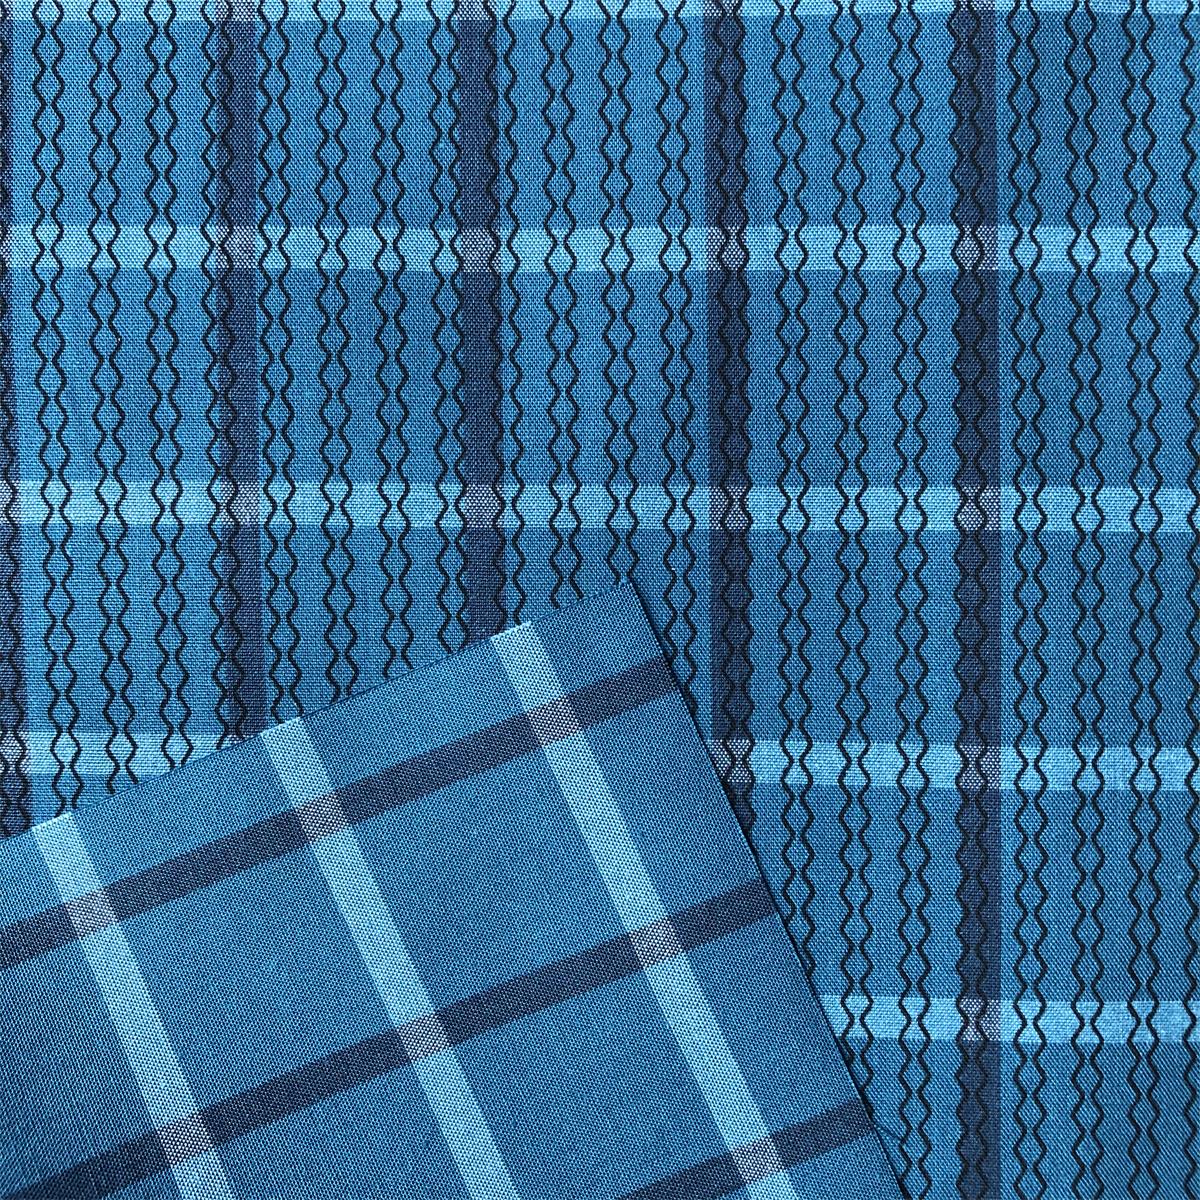 Customized pattern Cotton Fabric for mens casual shirts 100 cotton printed on yarn dyed plain check woven shirts fabric